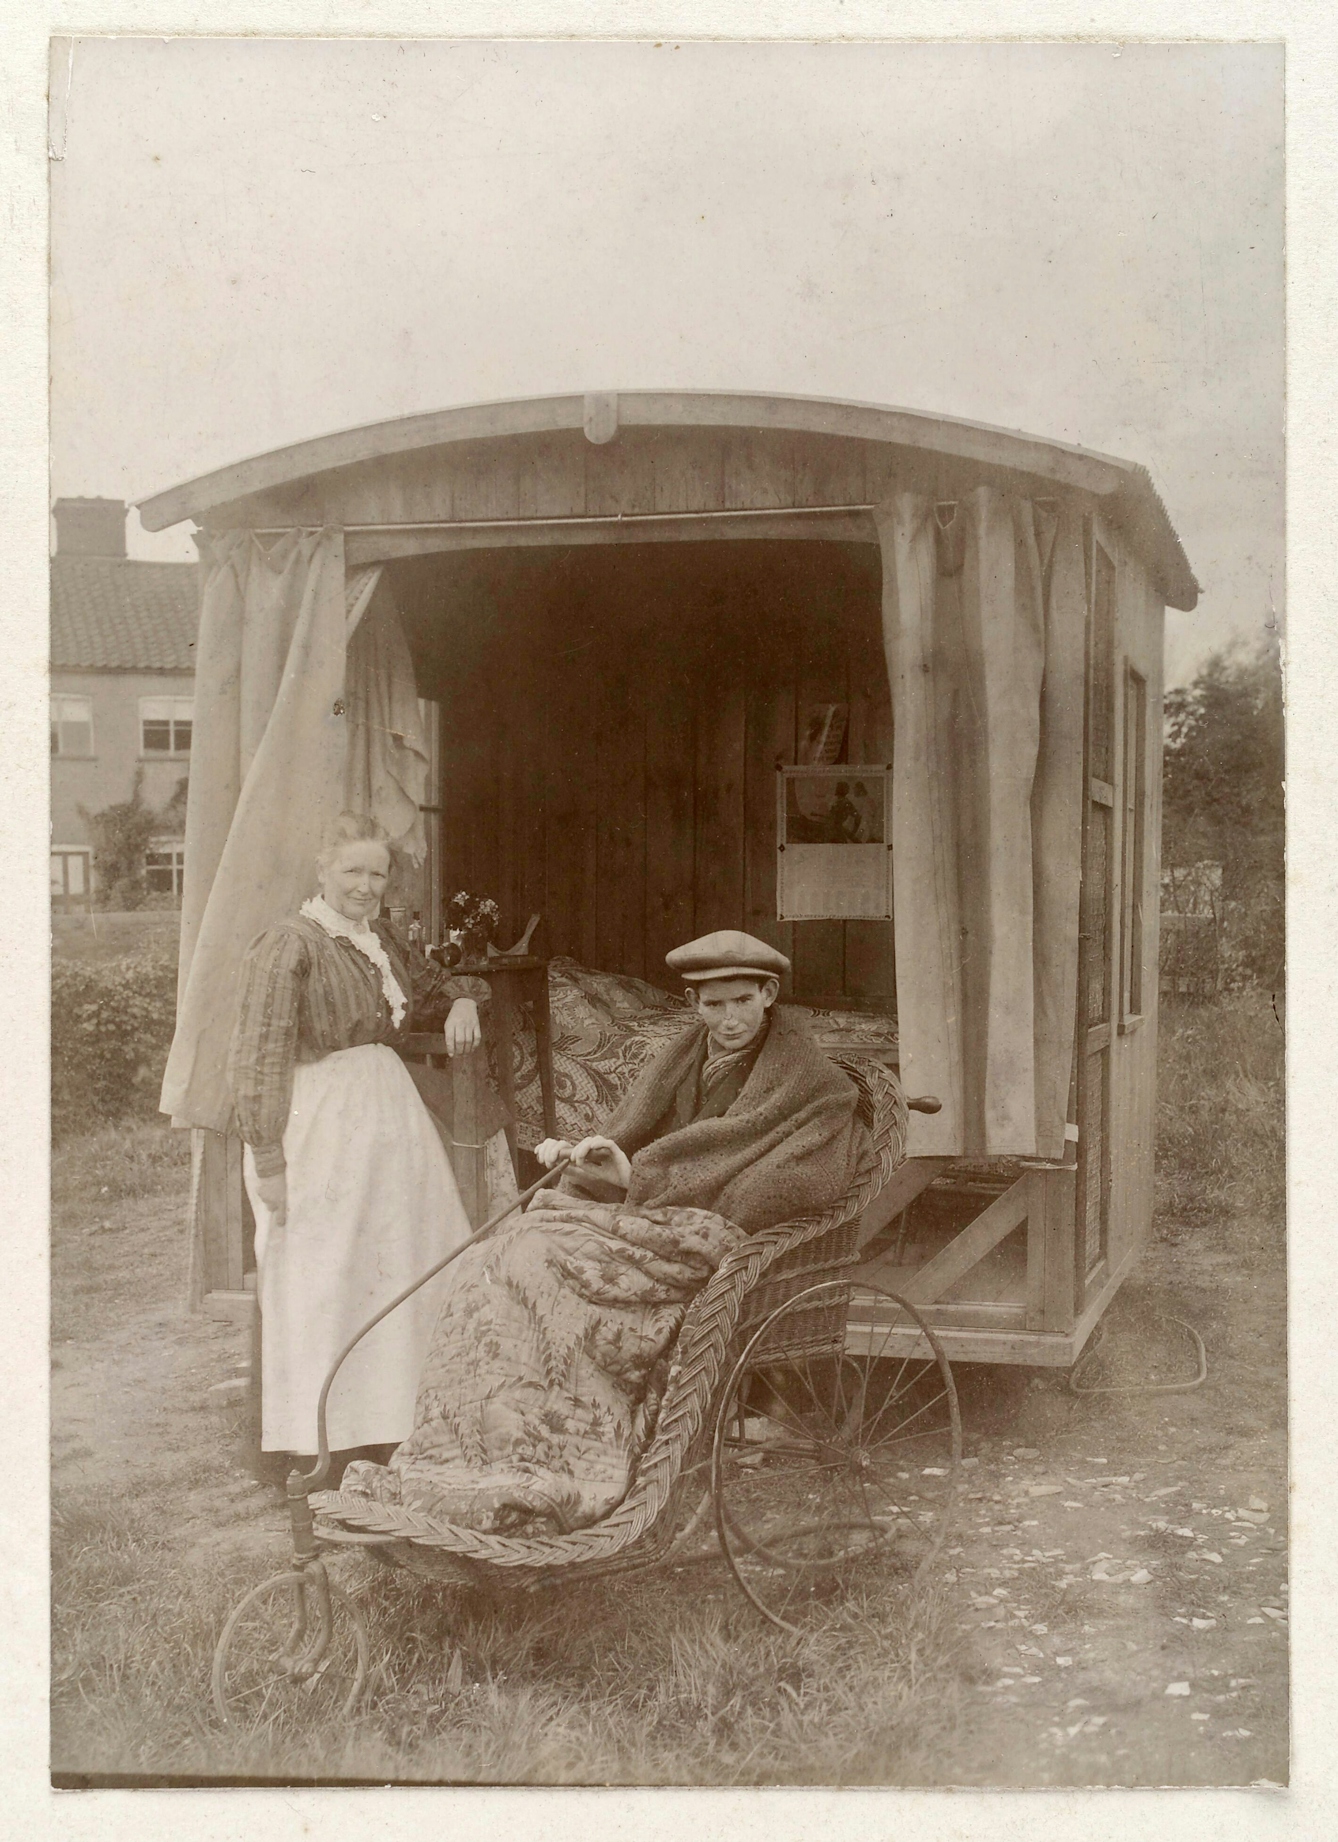 A black and white photograph of an adolescent boy wrapped in blankets and wearing a cloth cap sitting in a whicker bath chair. The chair is infront of a small wooden 'chalet' containing a bed. A nurse in uniform stands to the left of the boy, leaning against the open back of the chalet and both she and the boy gaze directly at the camera.